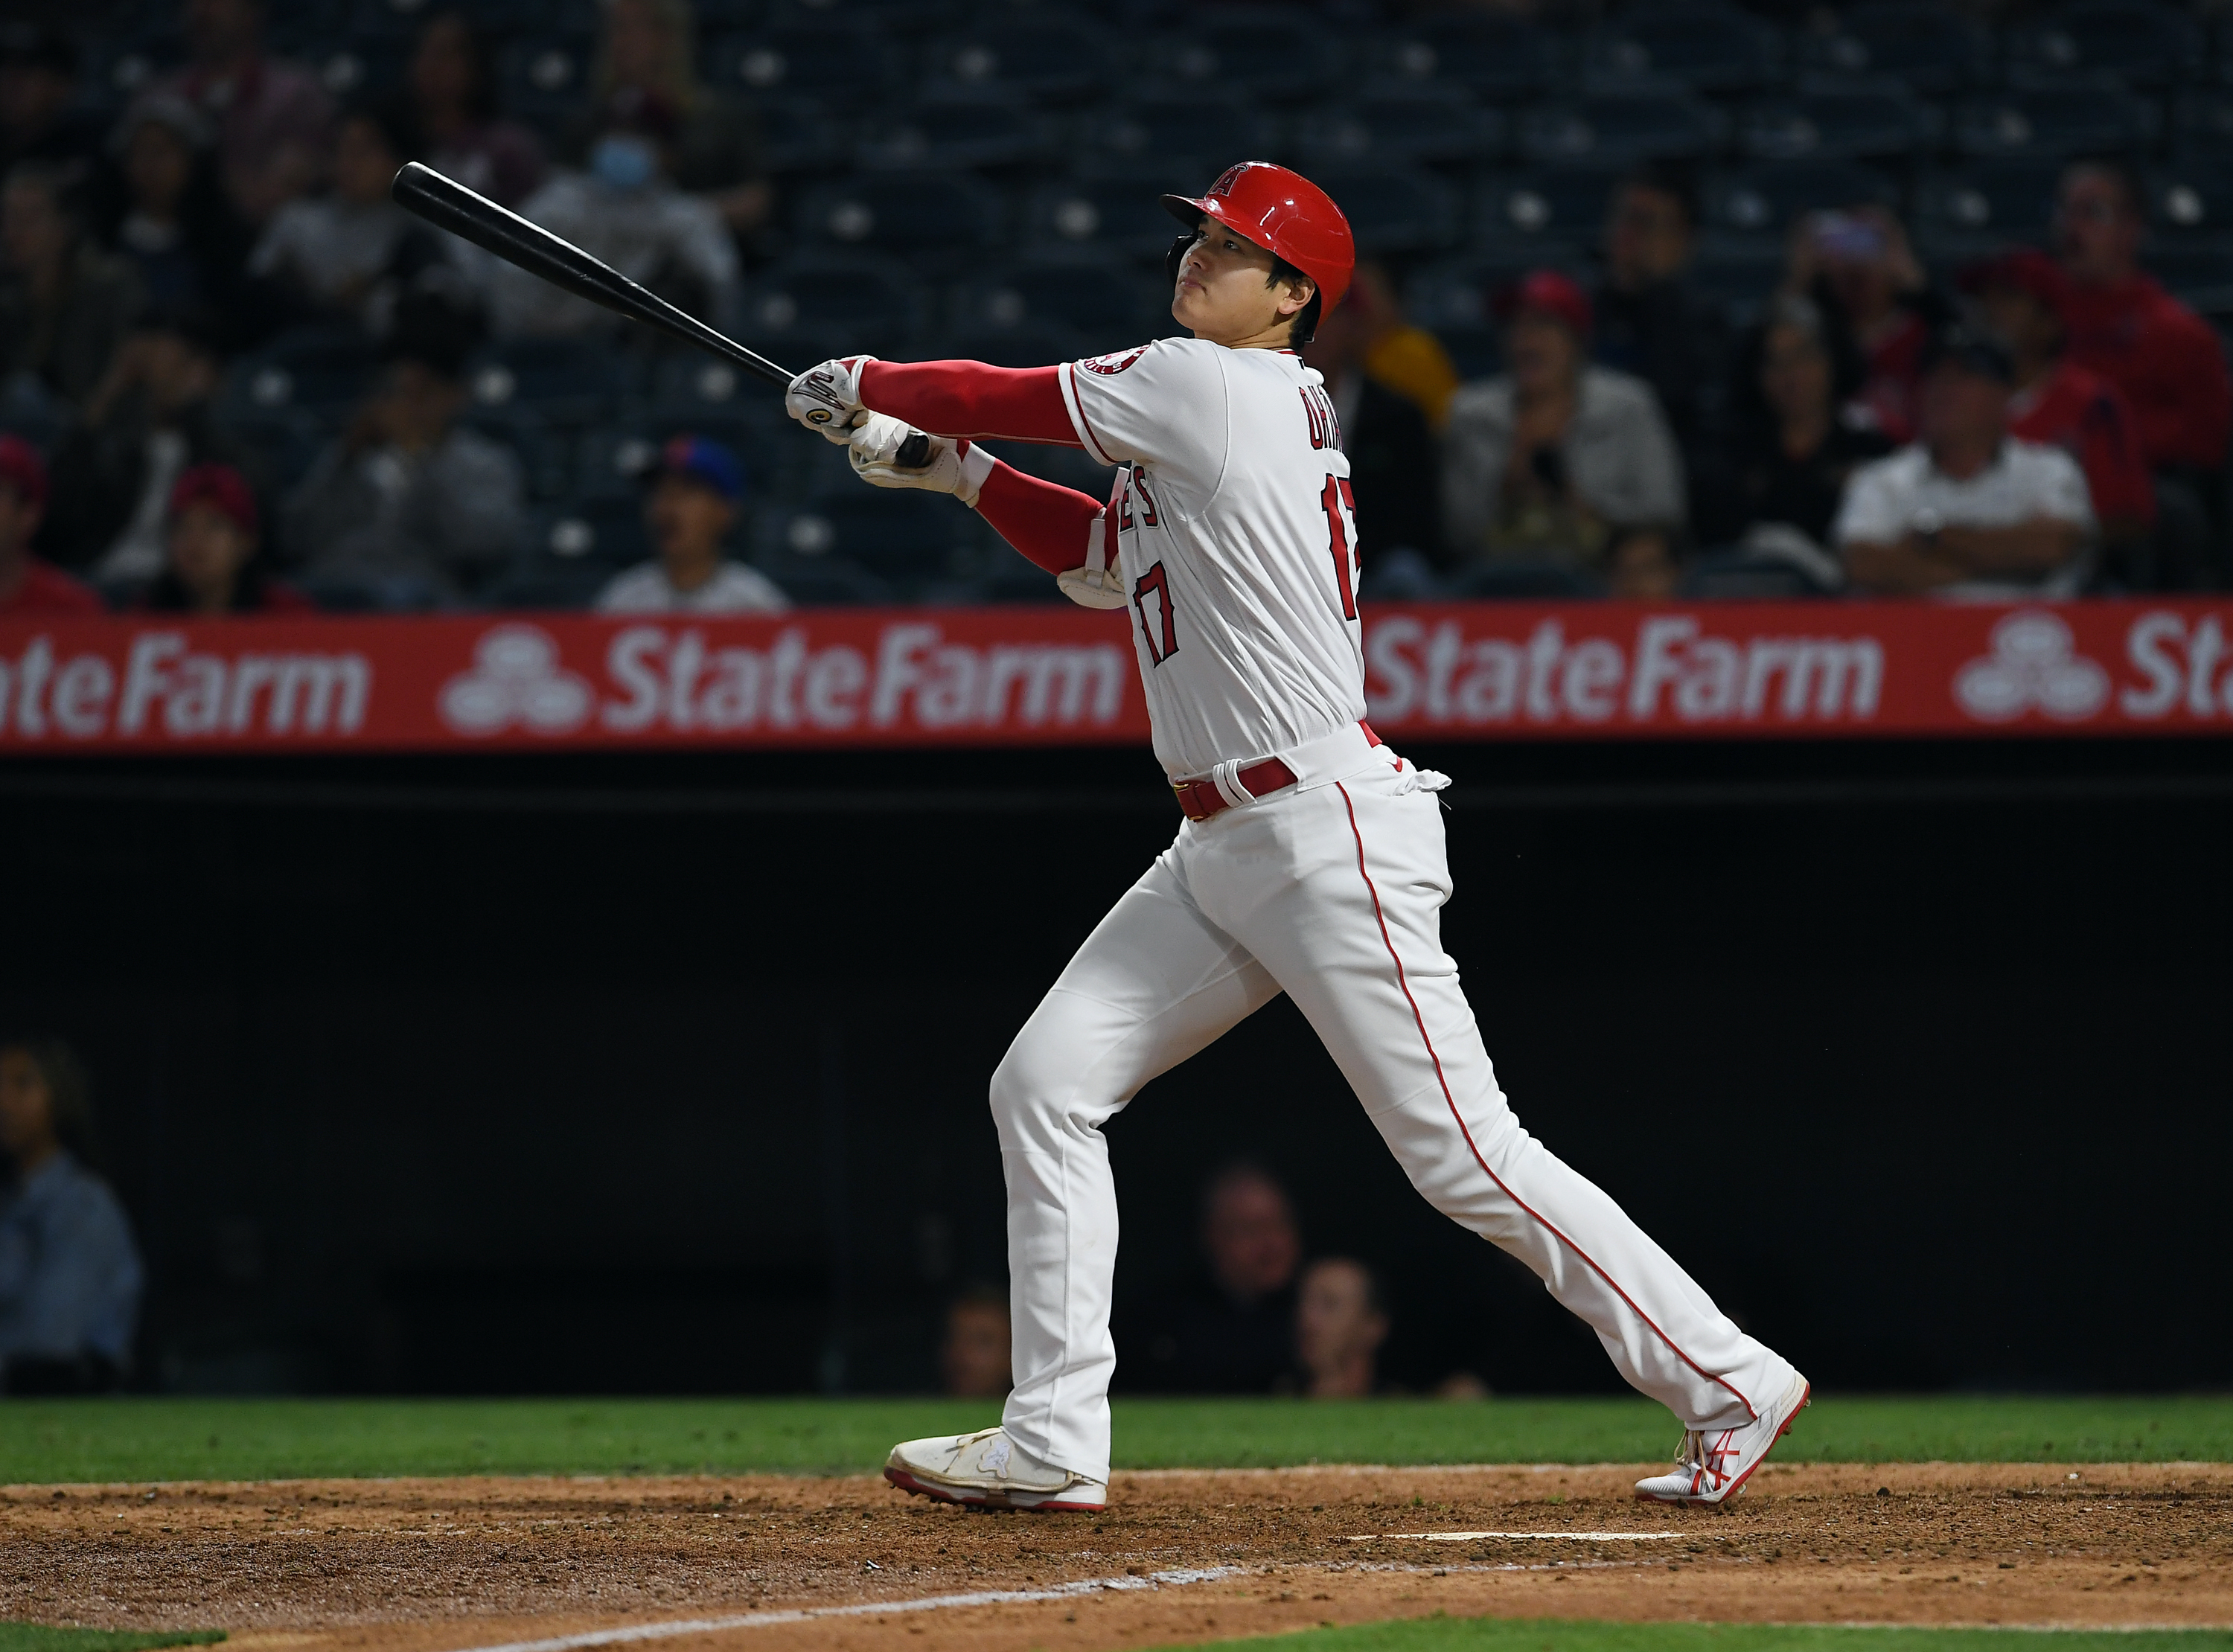 MLB Home Run Derby 2021: Shohei Ohtani announces he will compete